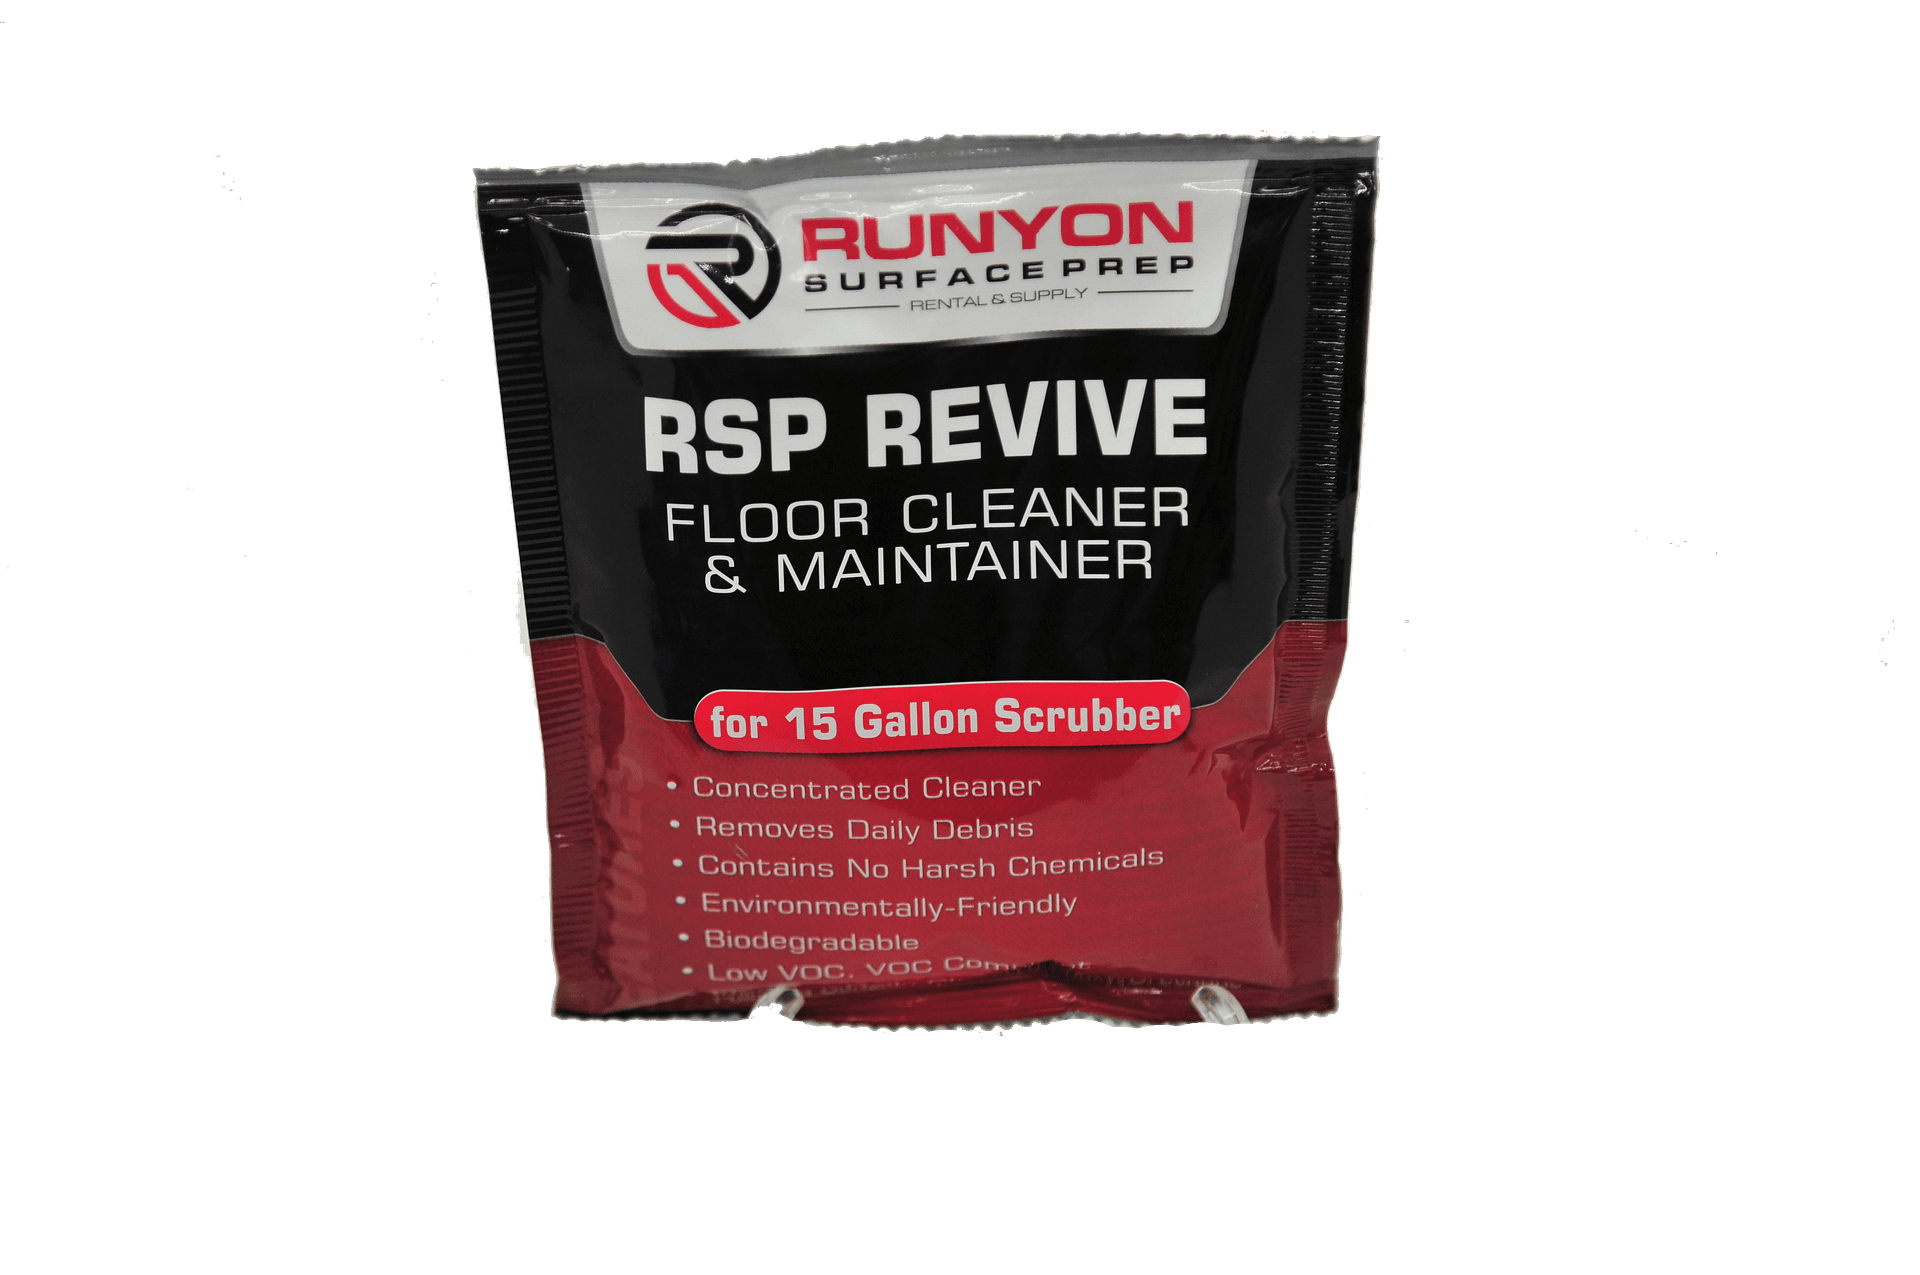 RSP Revive Floor Cleaner - Runyon Surface Prep